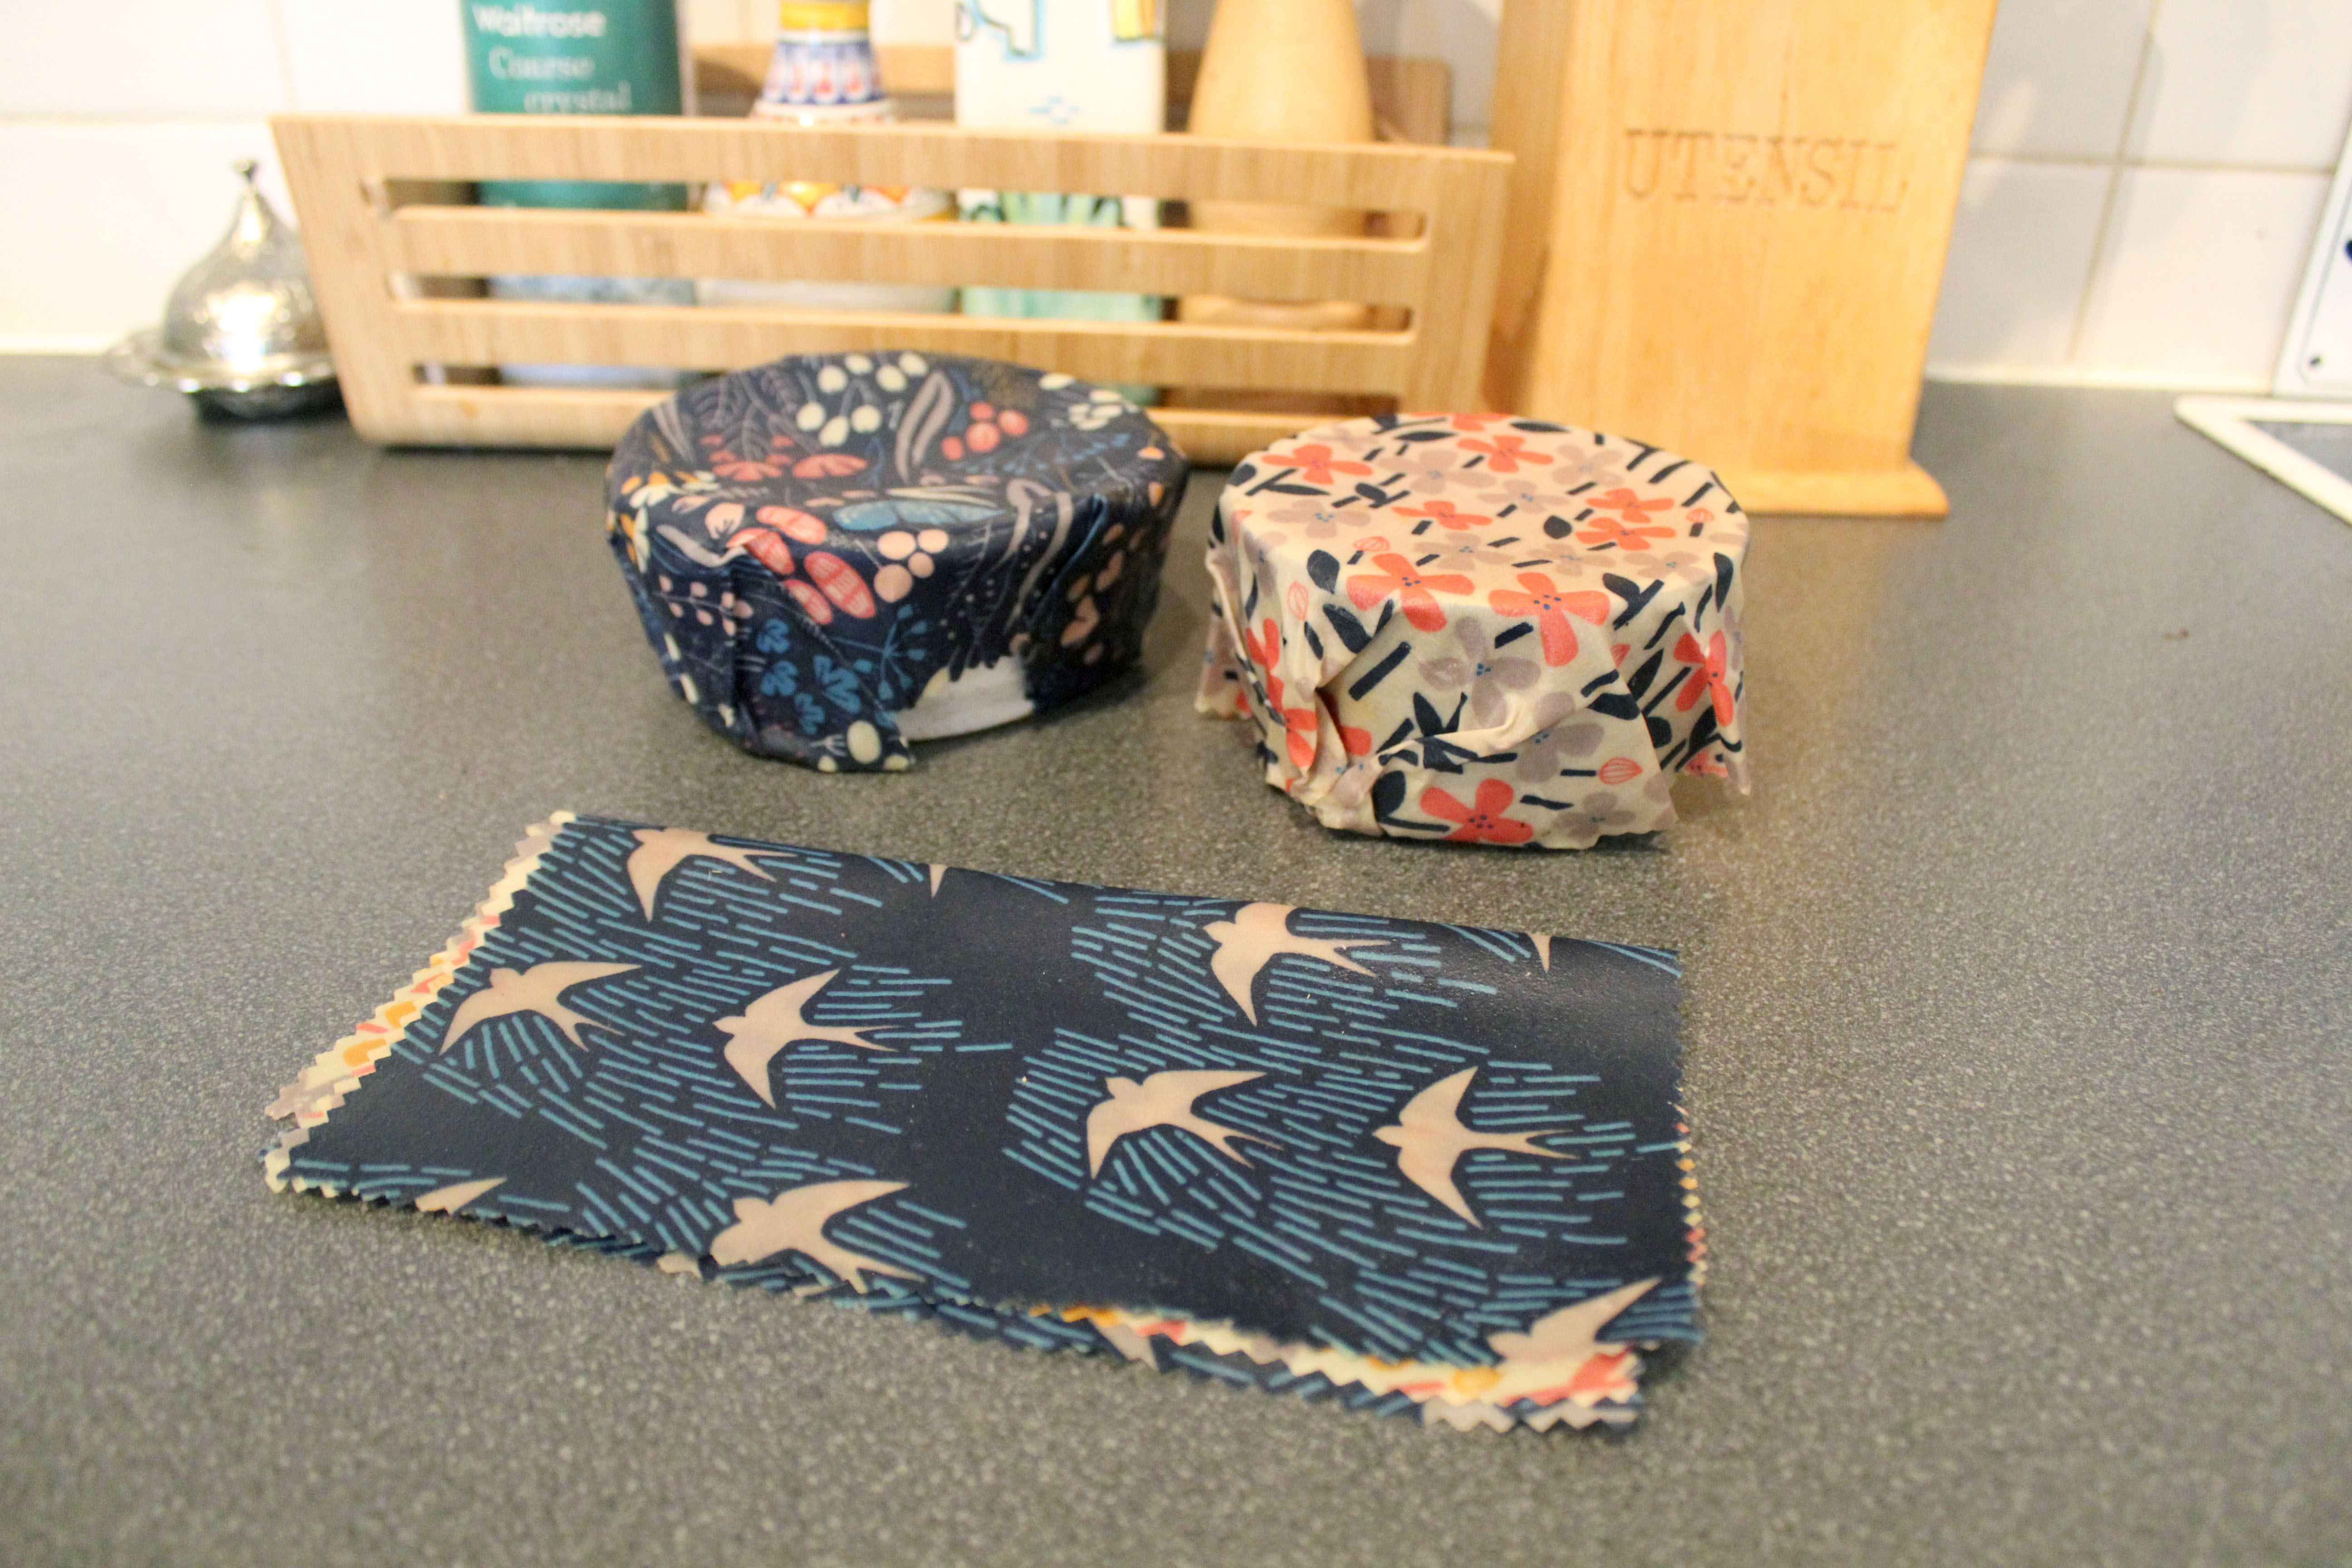 Eco-friendly Beeswax wraps covering containers